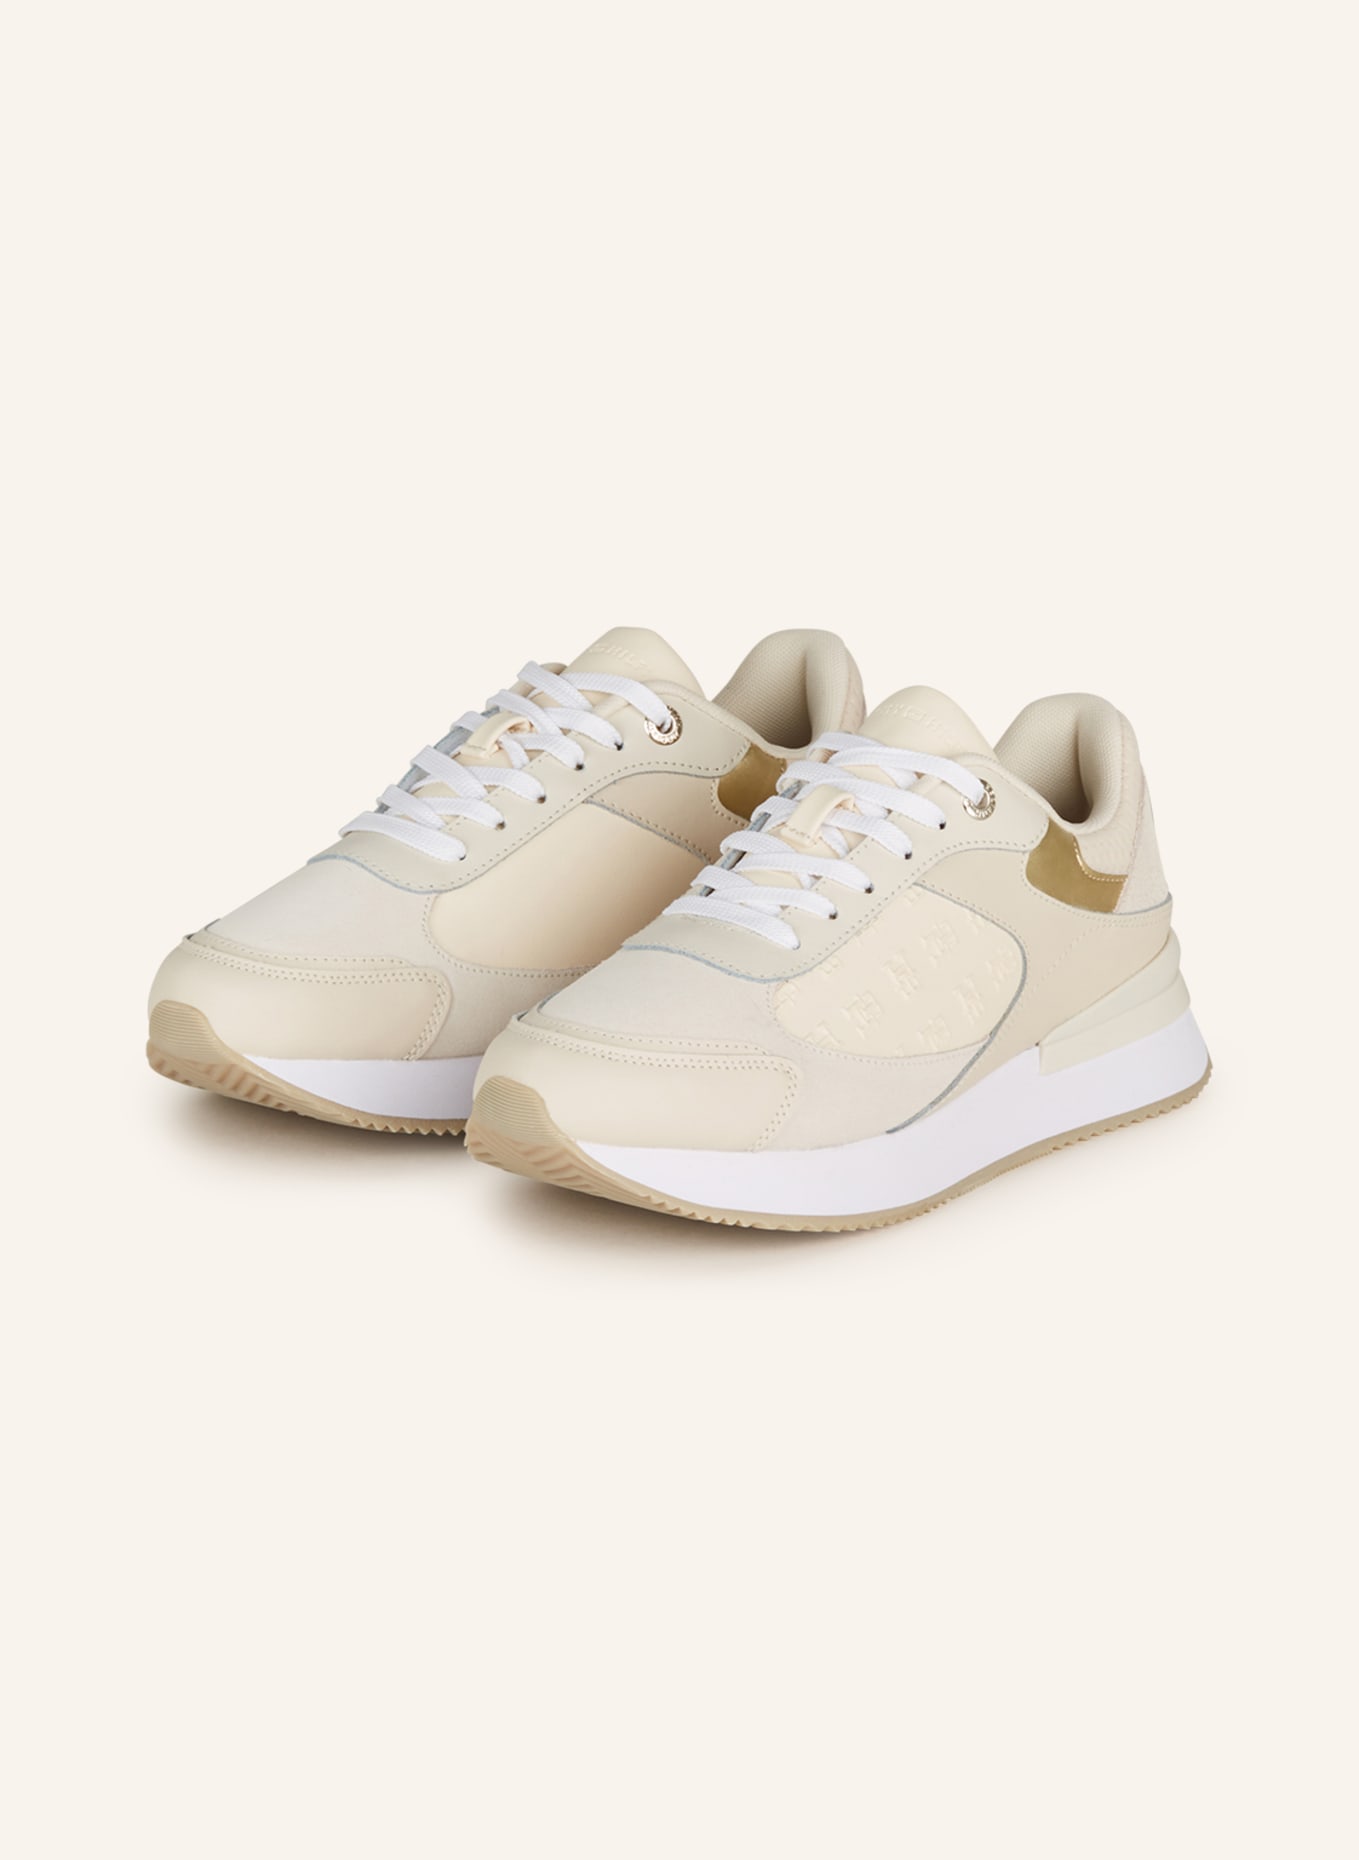 Buy Tommy Hilfiger Women Solid Lace Up Sneakers - NNNOW.com